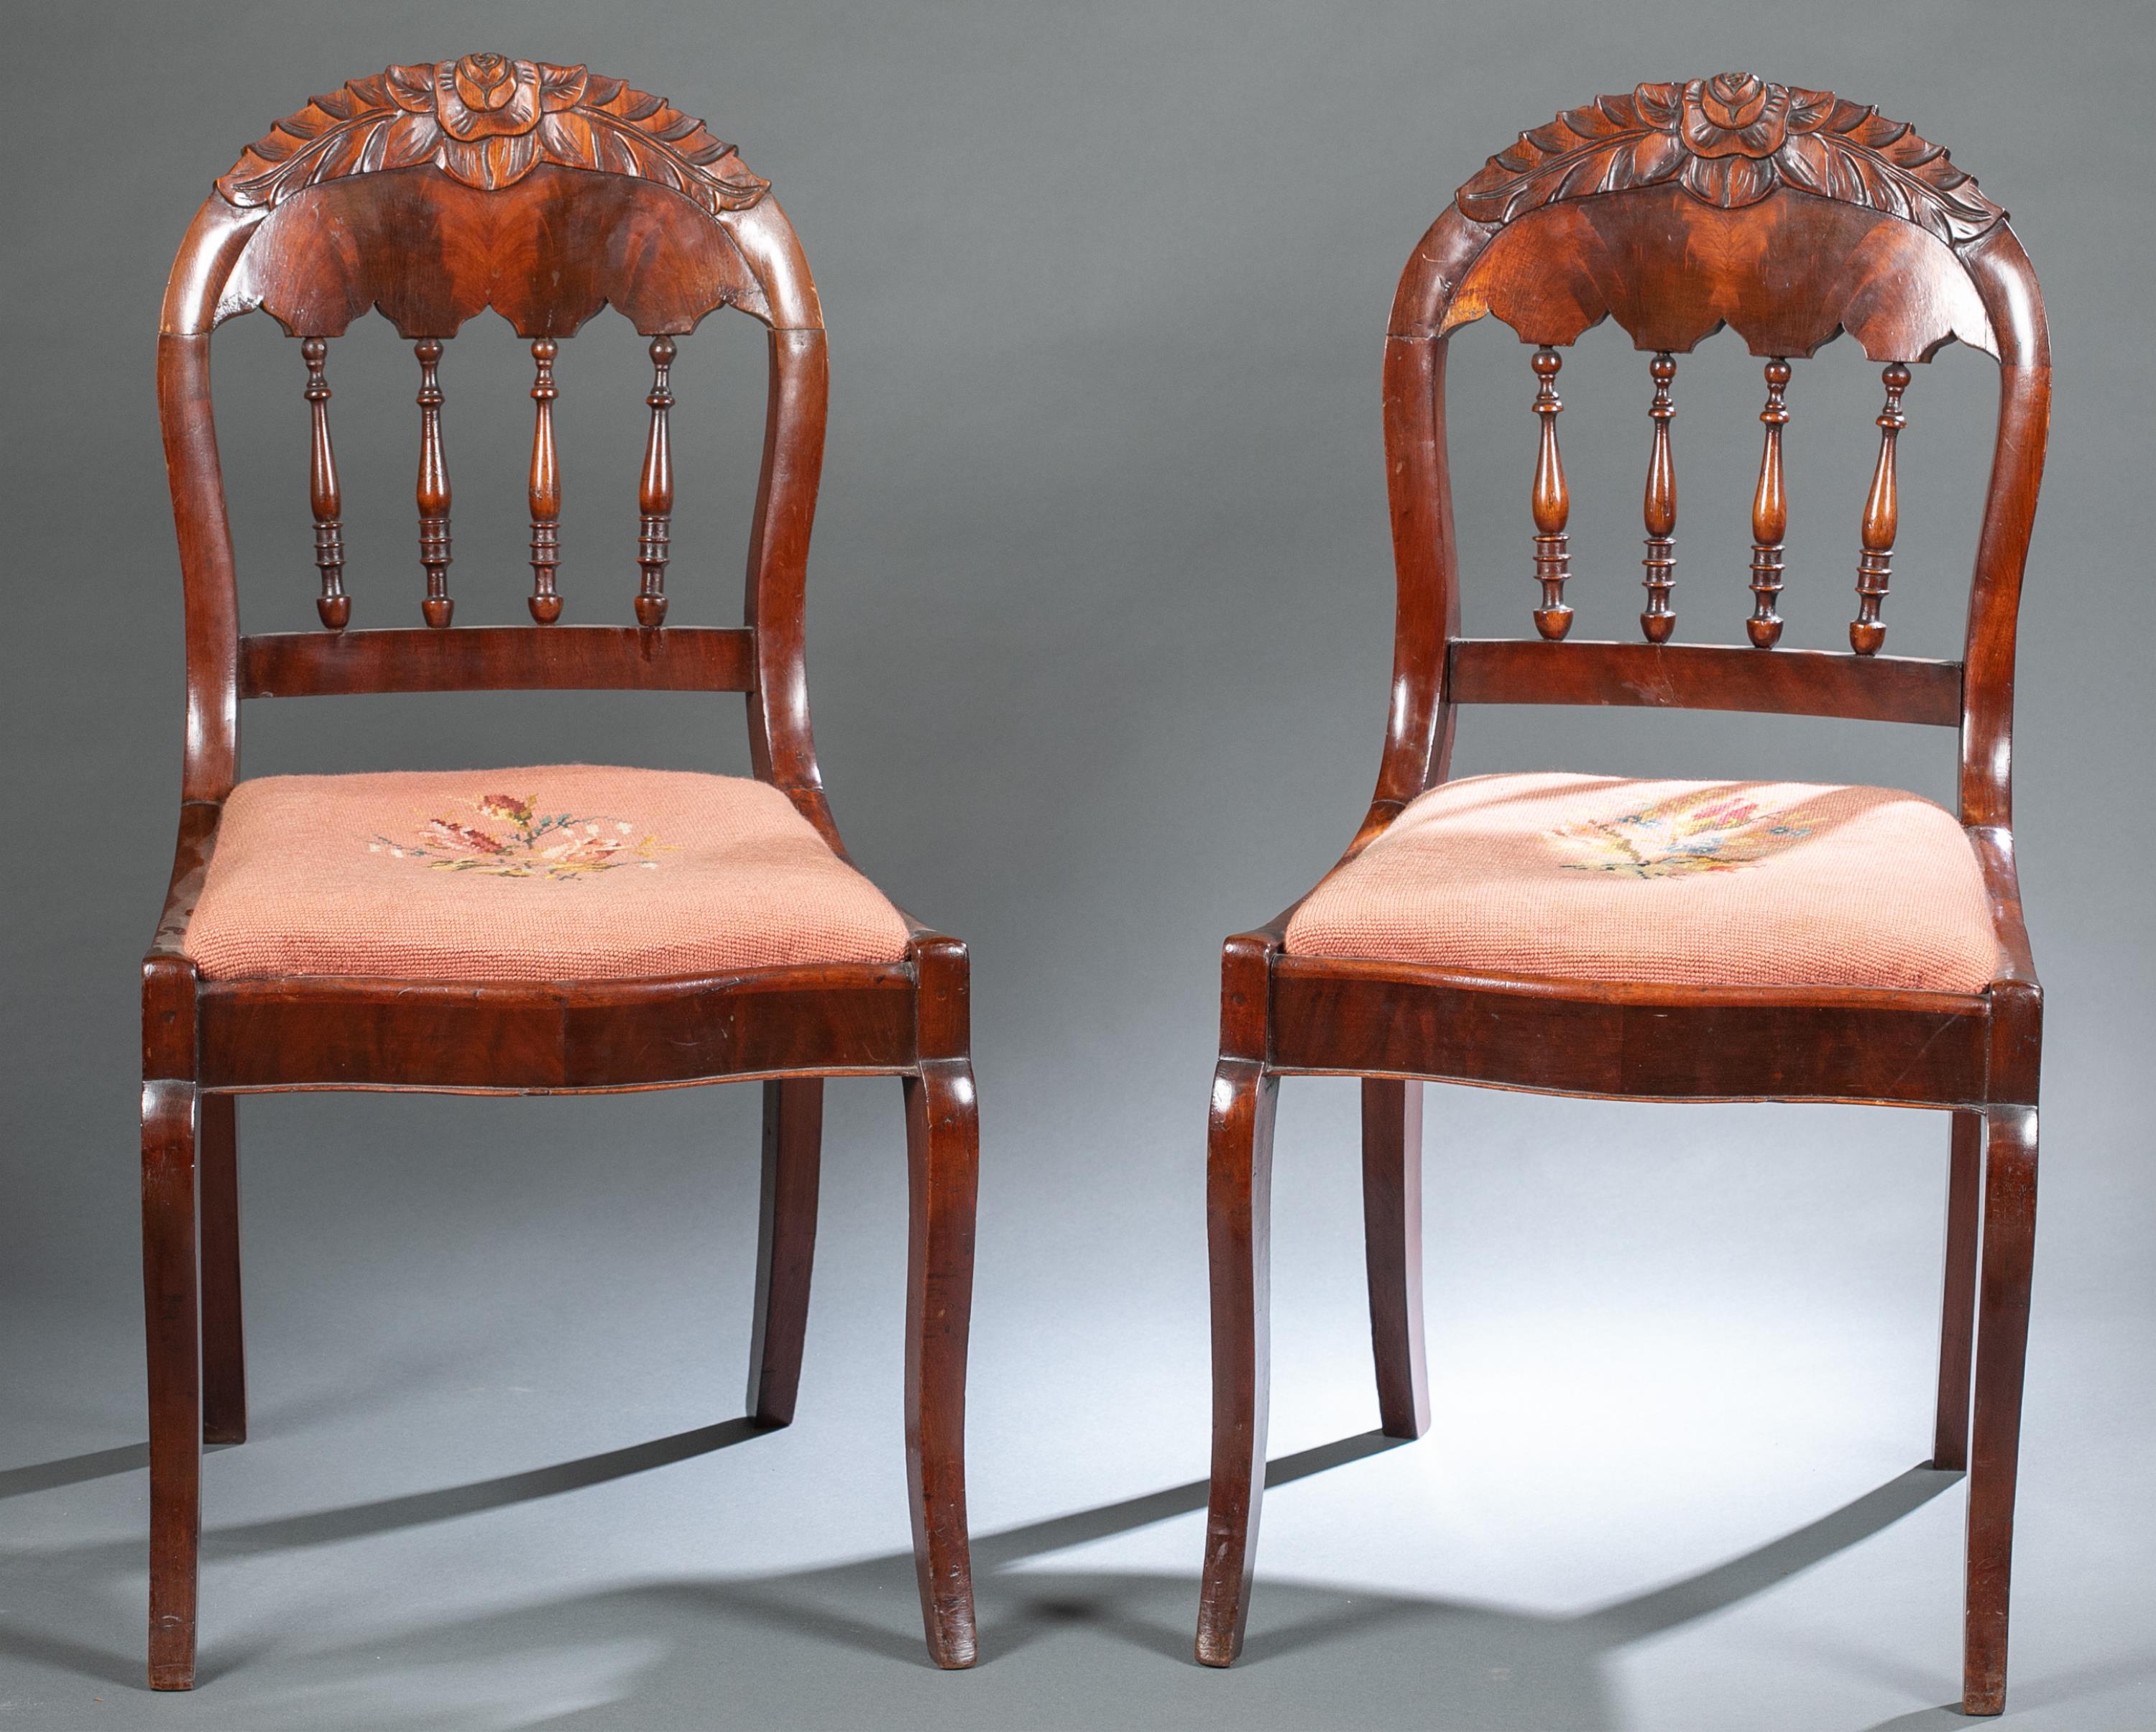 Pair of Gothic Revival sidechairs, c. 1850-70.